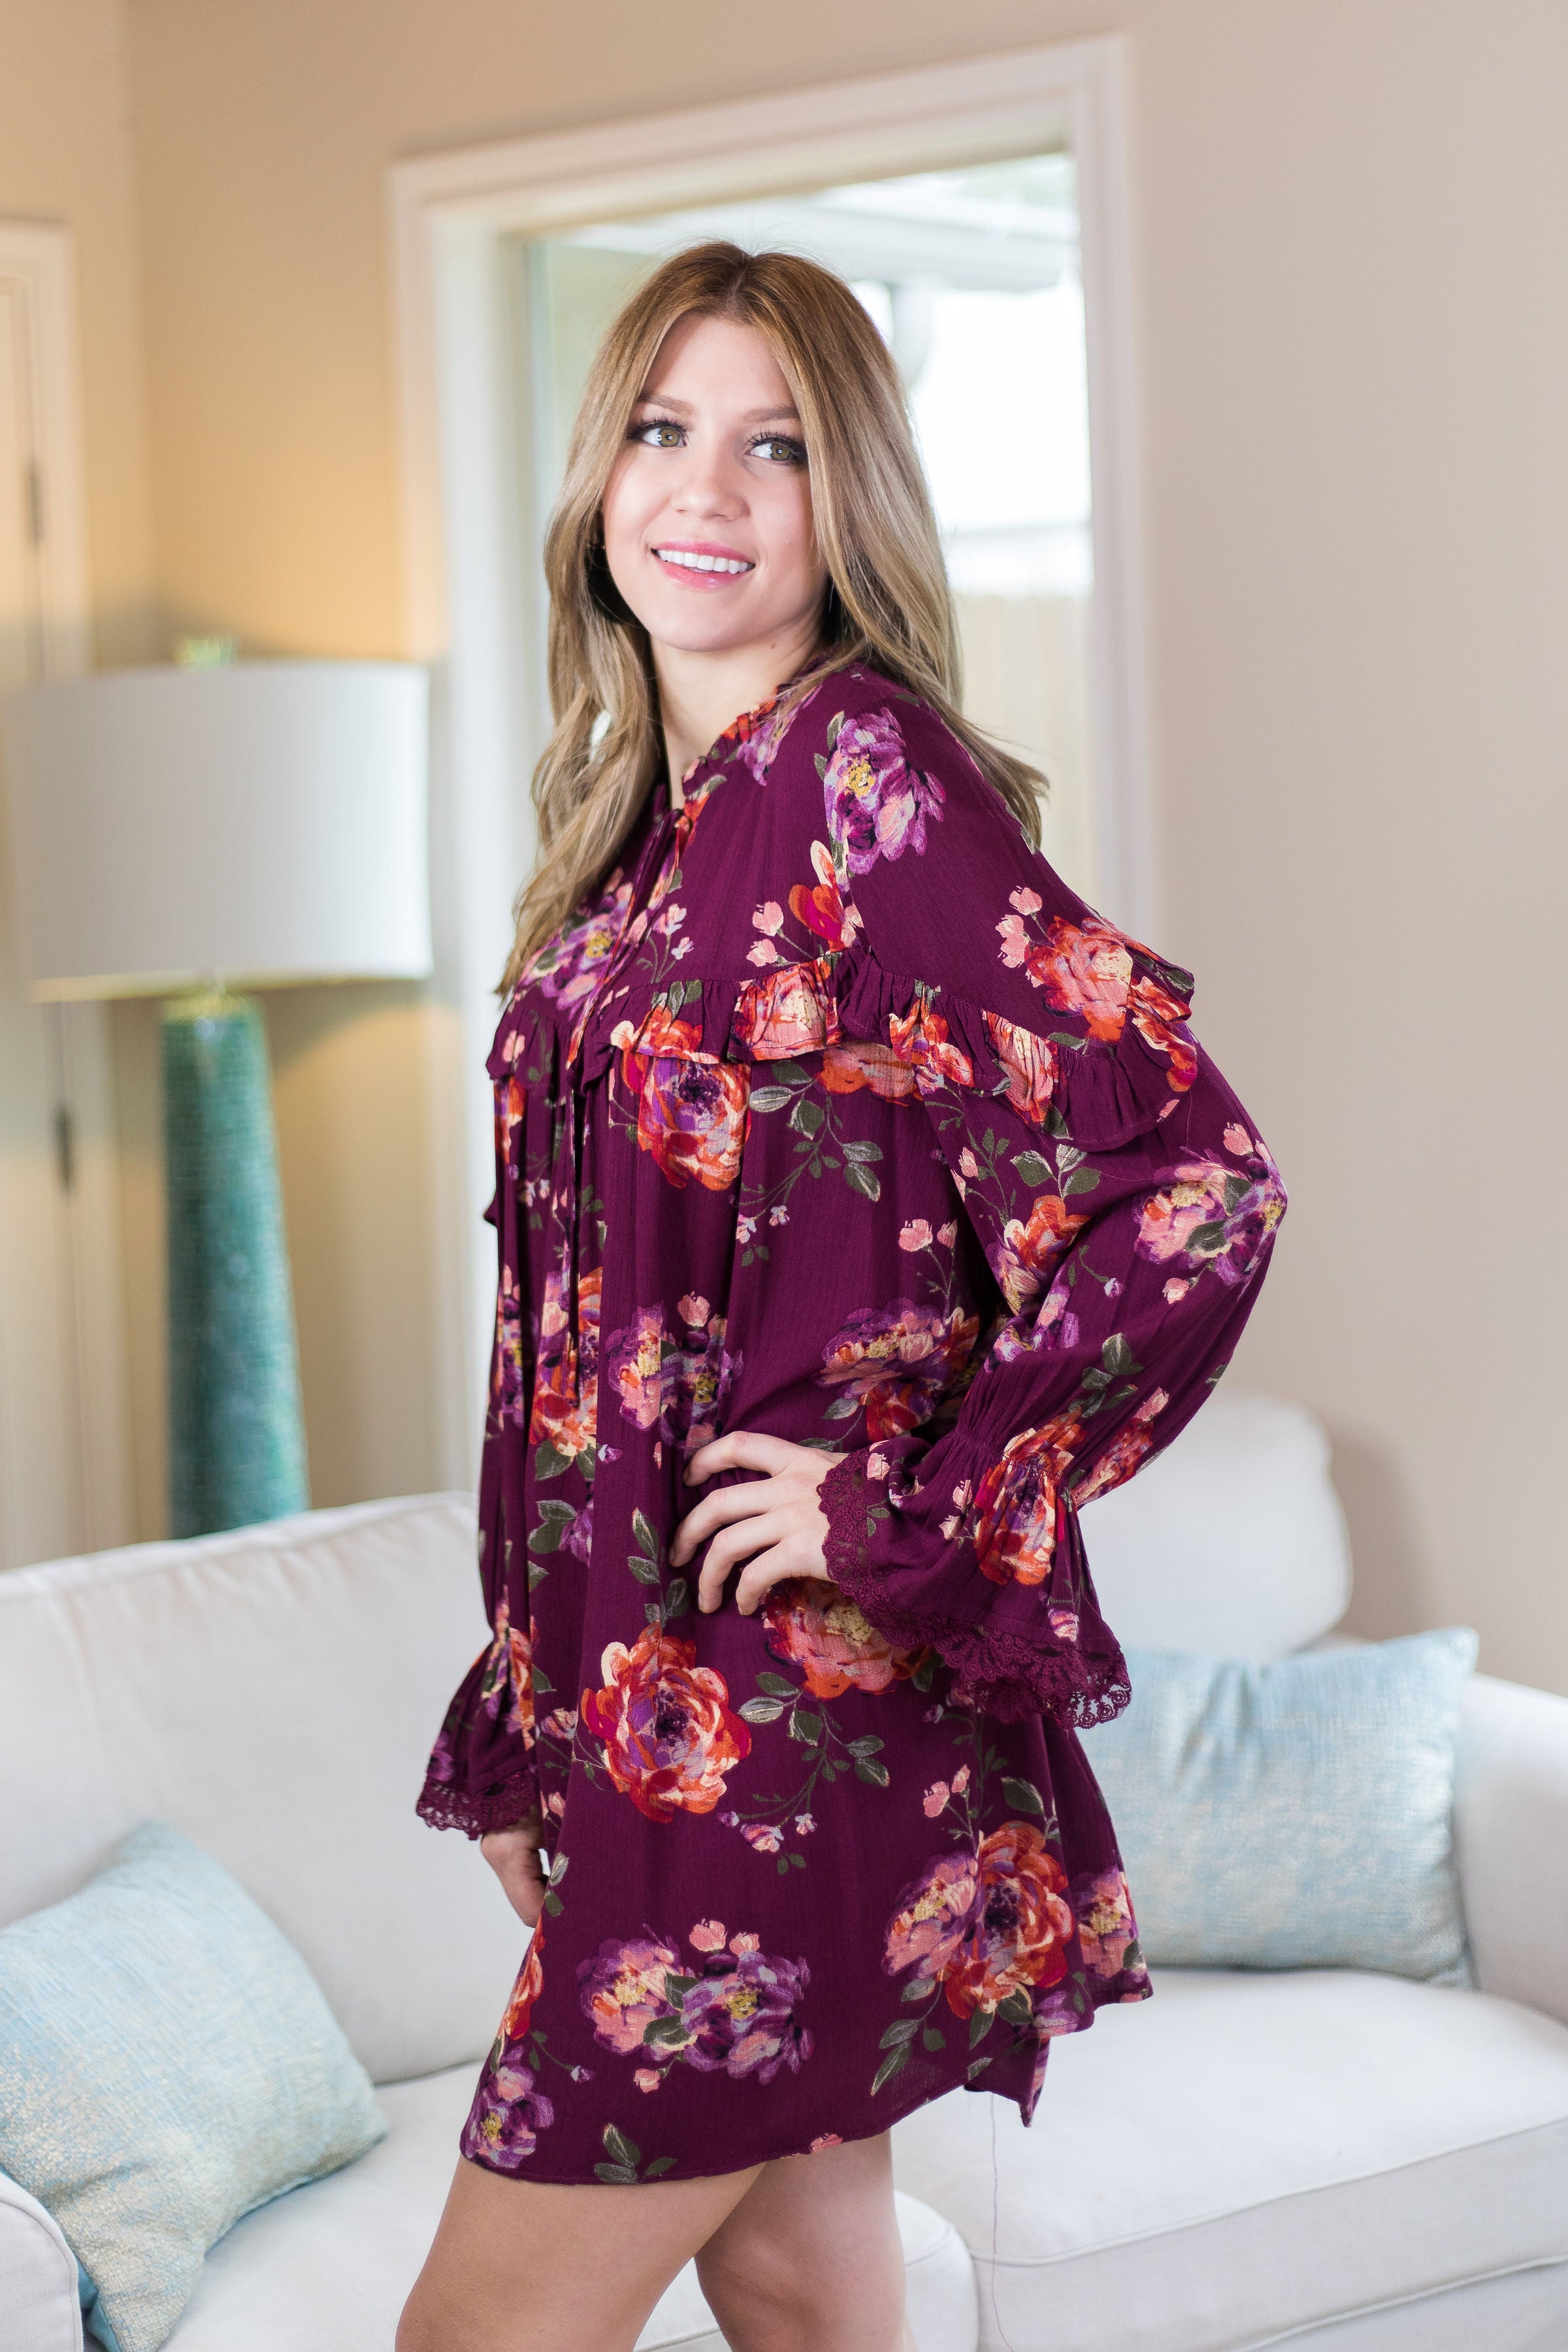 Last Chance size Small| Make Things Happen Floral Print Dress in Burgundy - Giddy Up Glamour Boutique